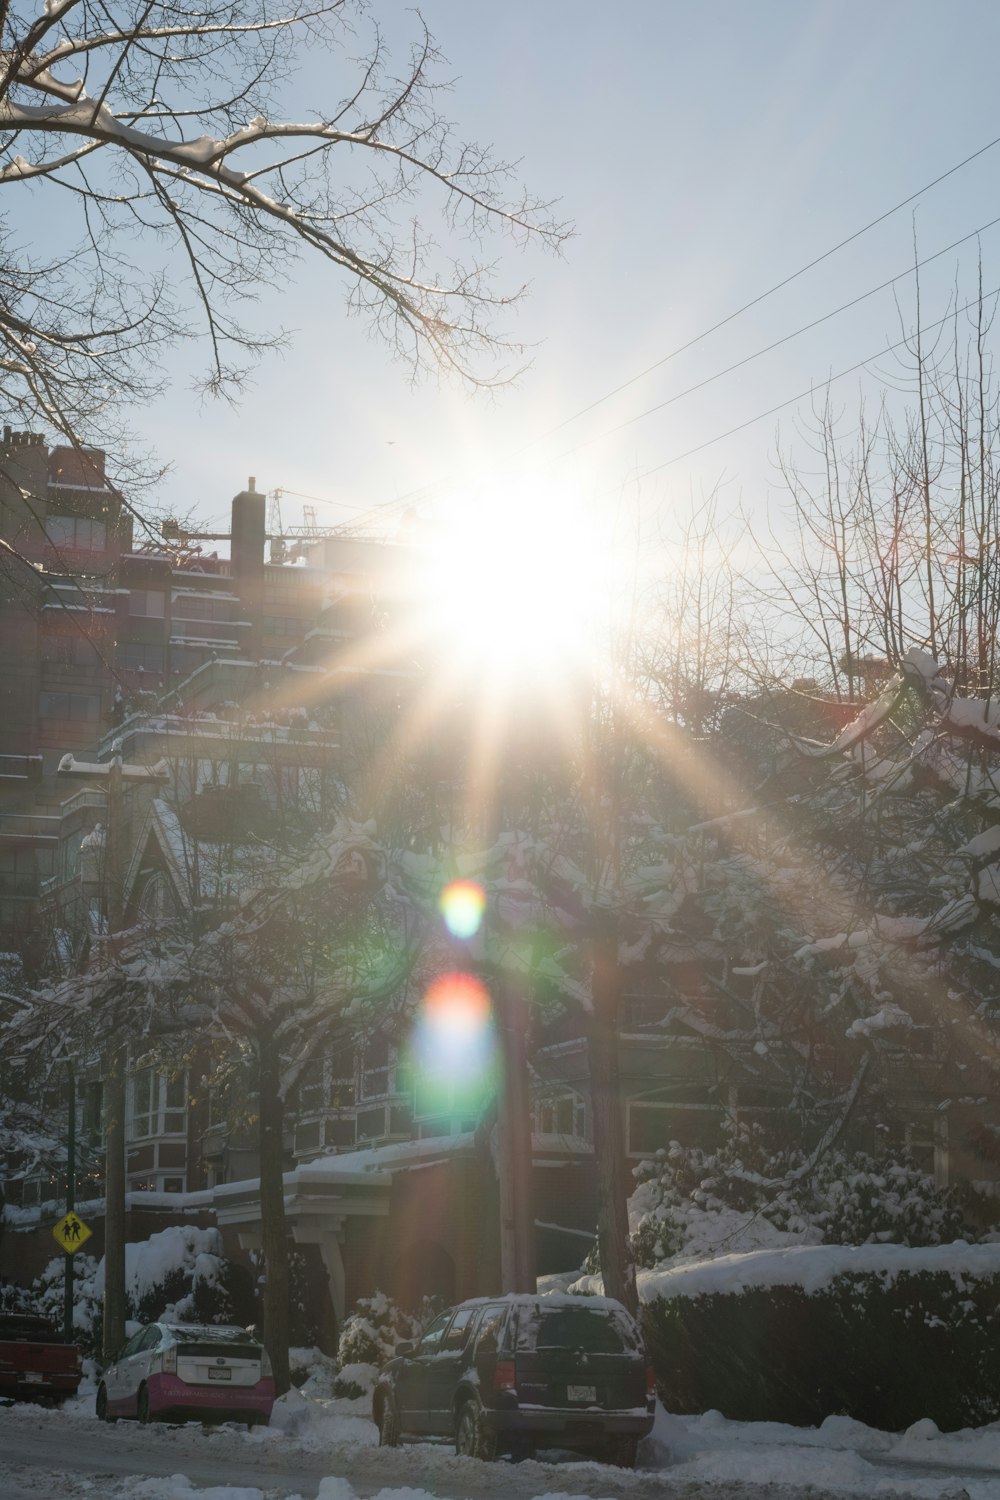 the sun is shining brightly over a snowy area